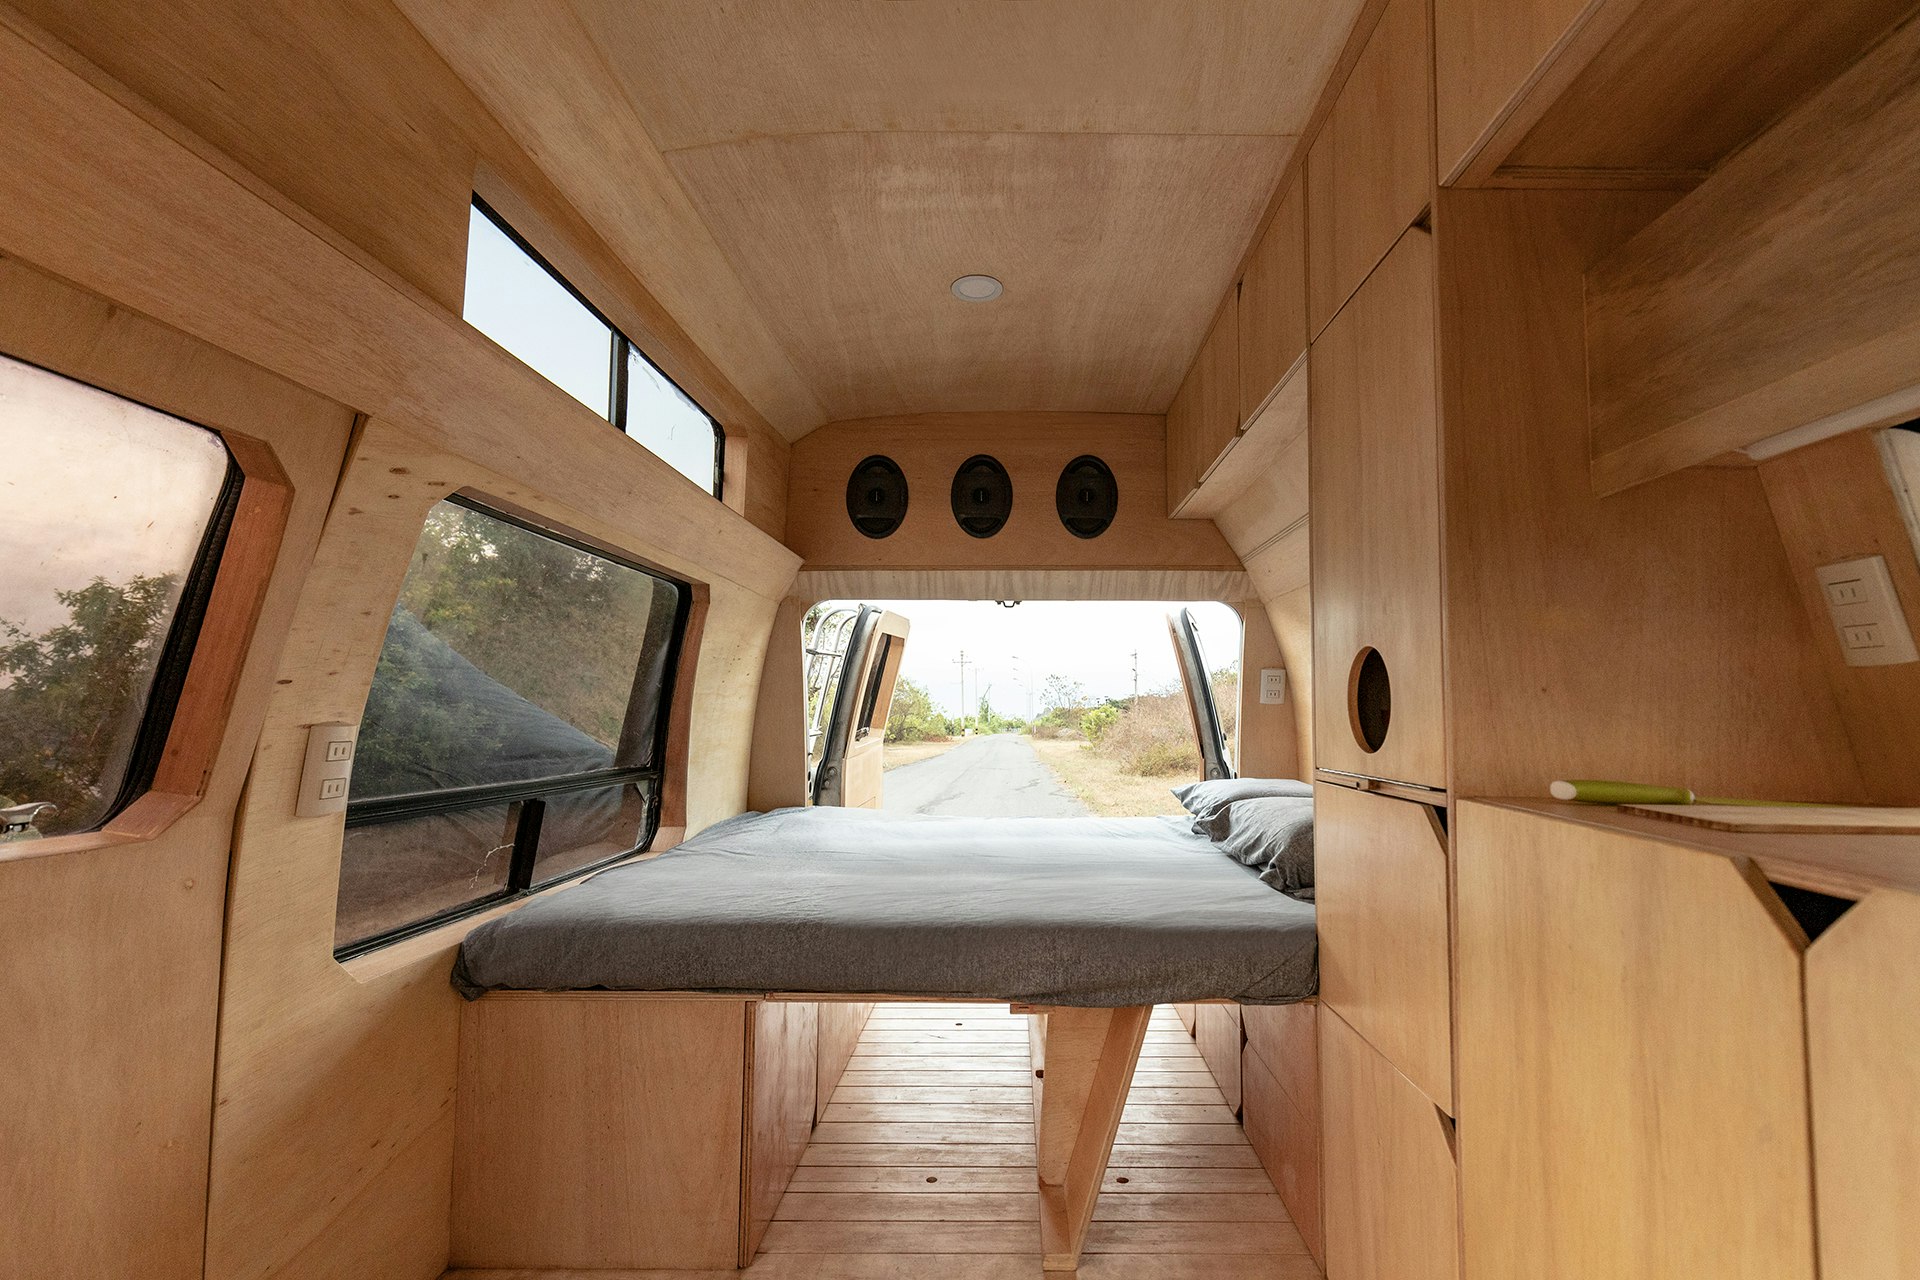 This Chevy Camper Van's Wondrous Wooden Interior Will Make You Look Twice -  Dwell